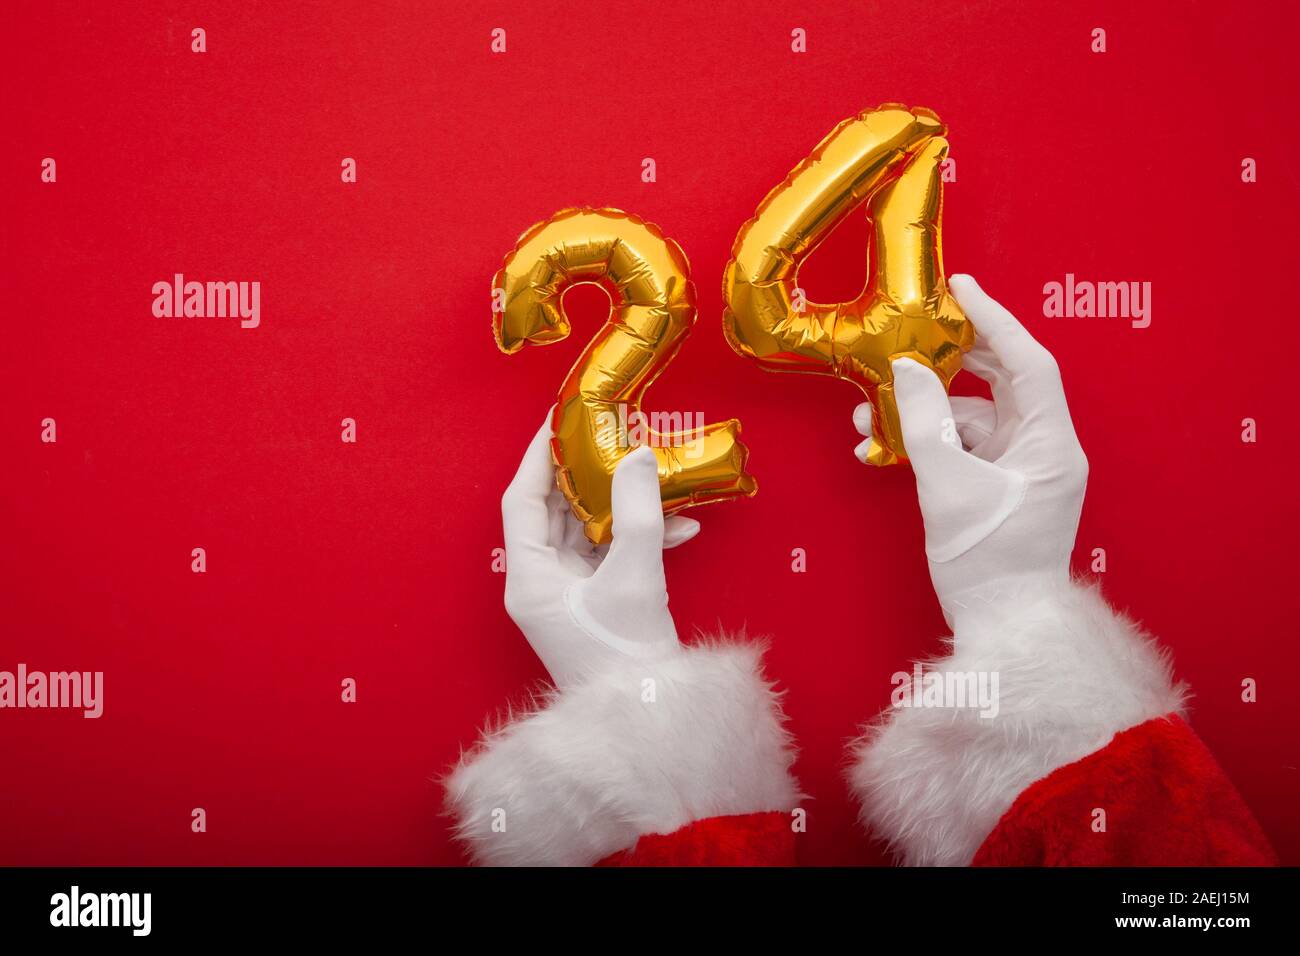 Santa hands holding 24th December gold balloons. Father Christmas background Stock Photo